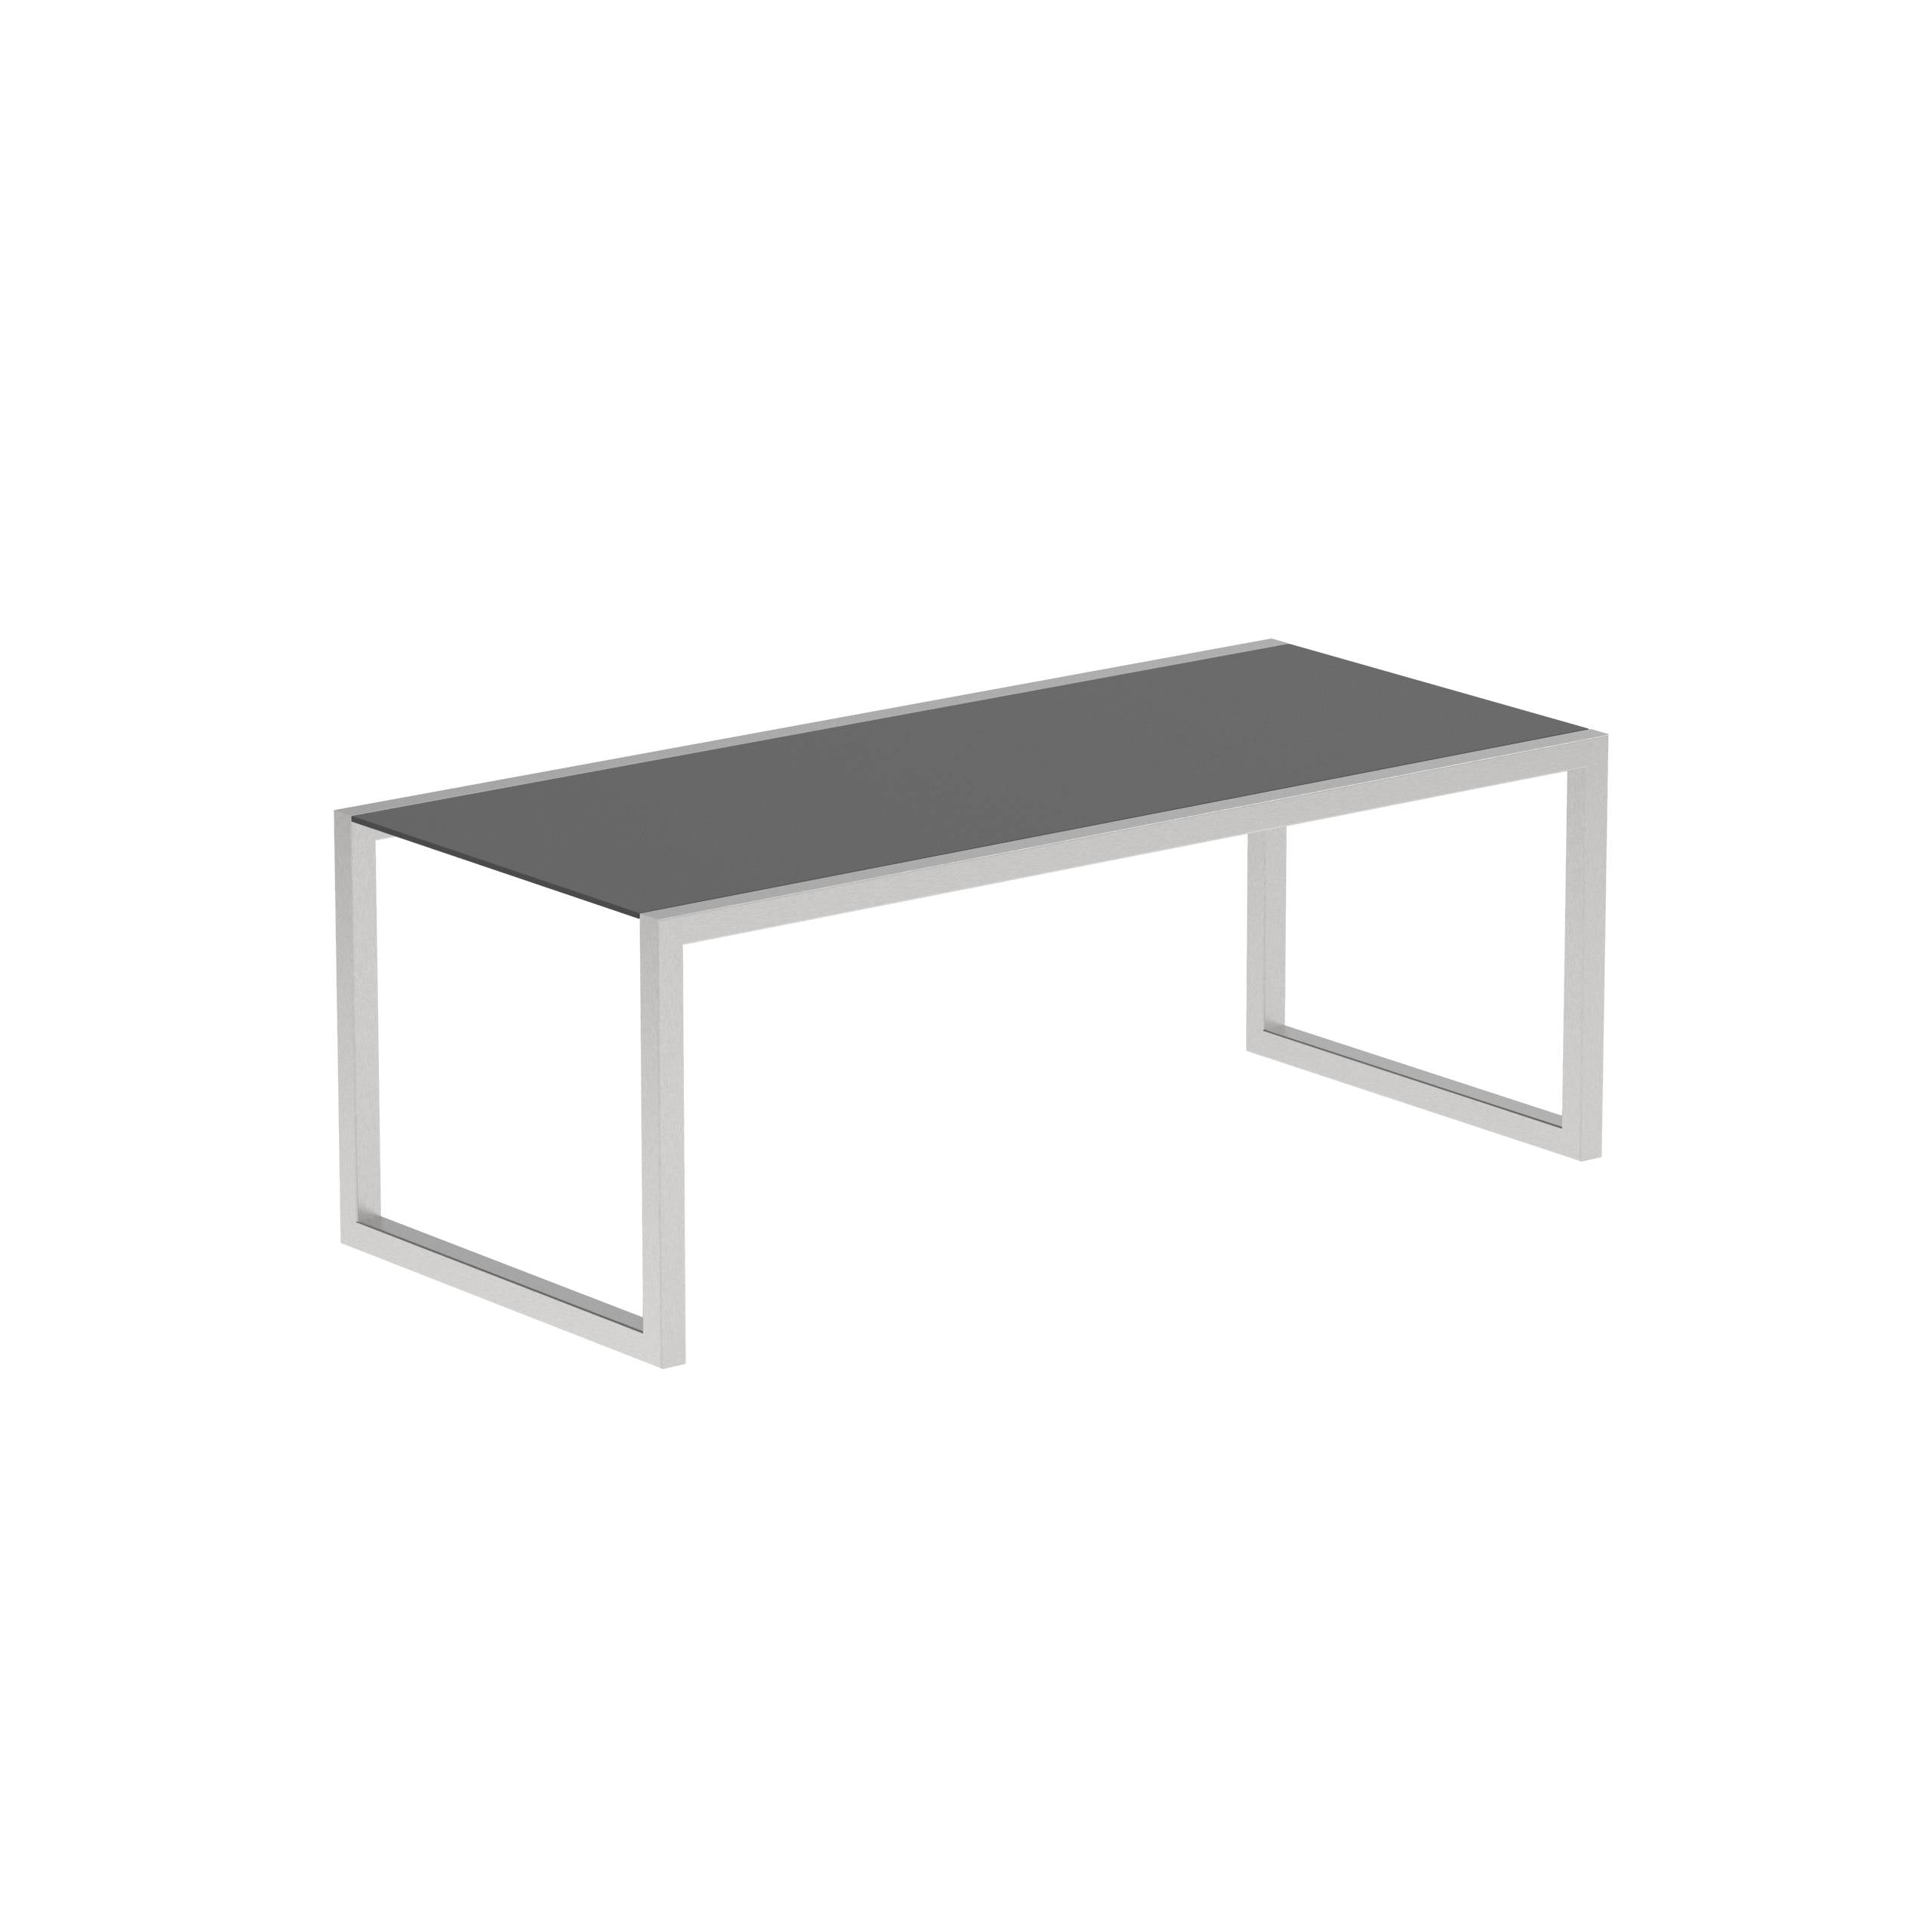 Ninix Table 200x90cm With Stainless Steel And Ceramic Black